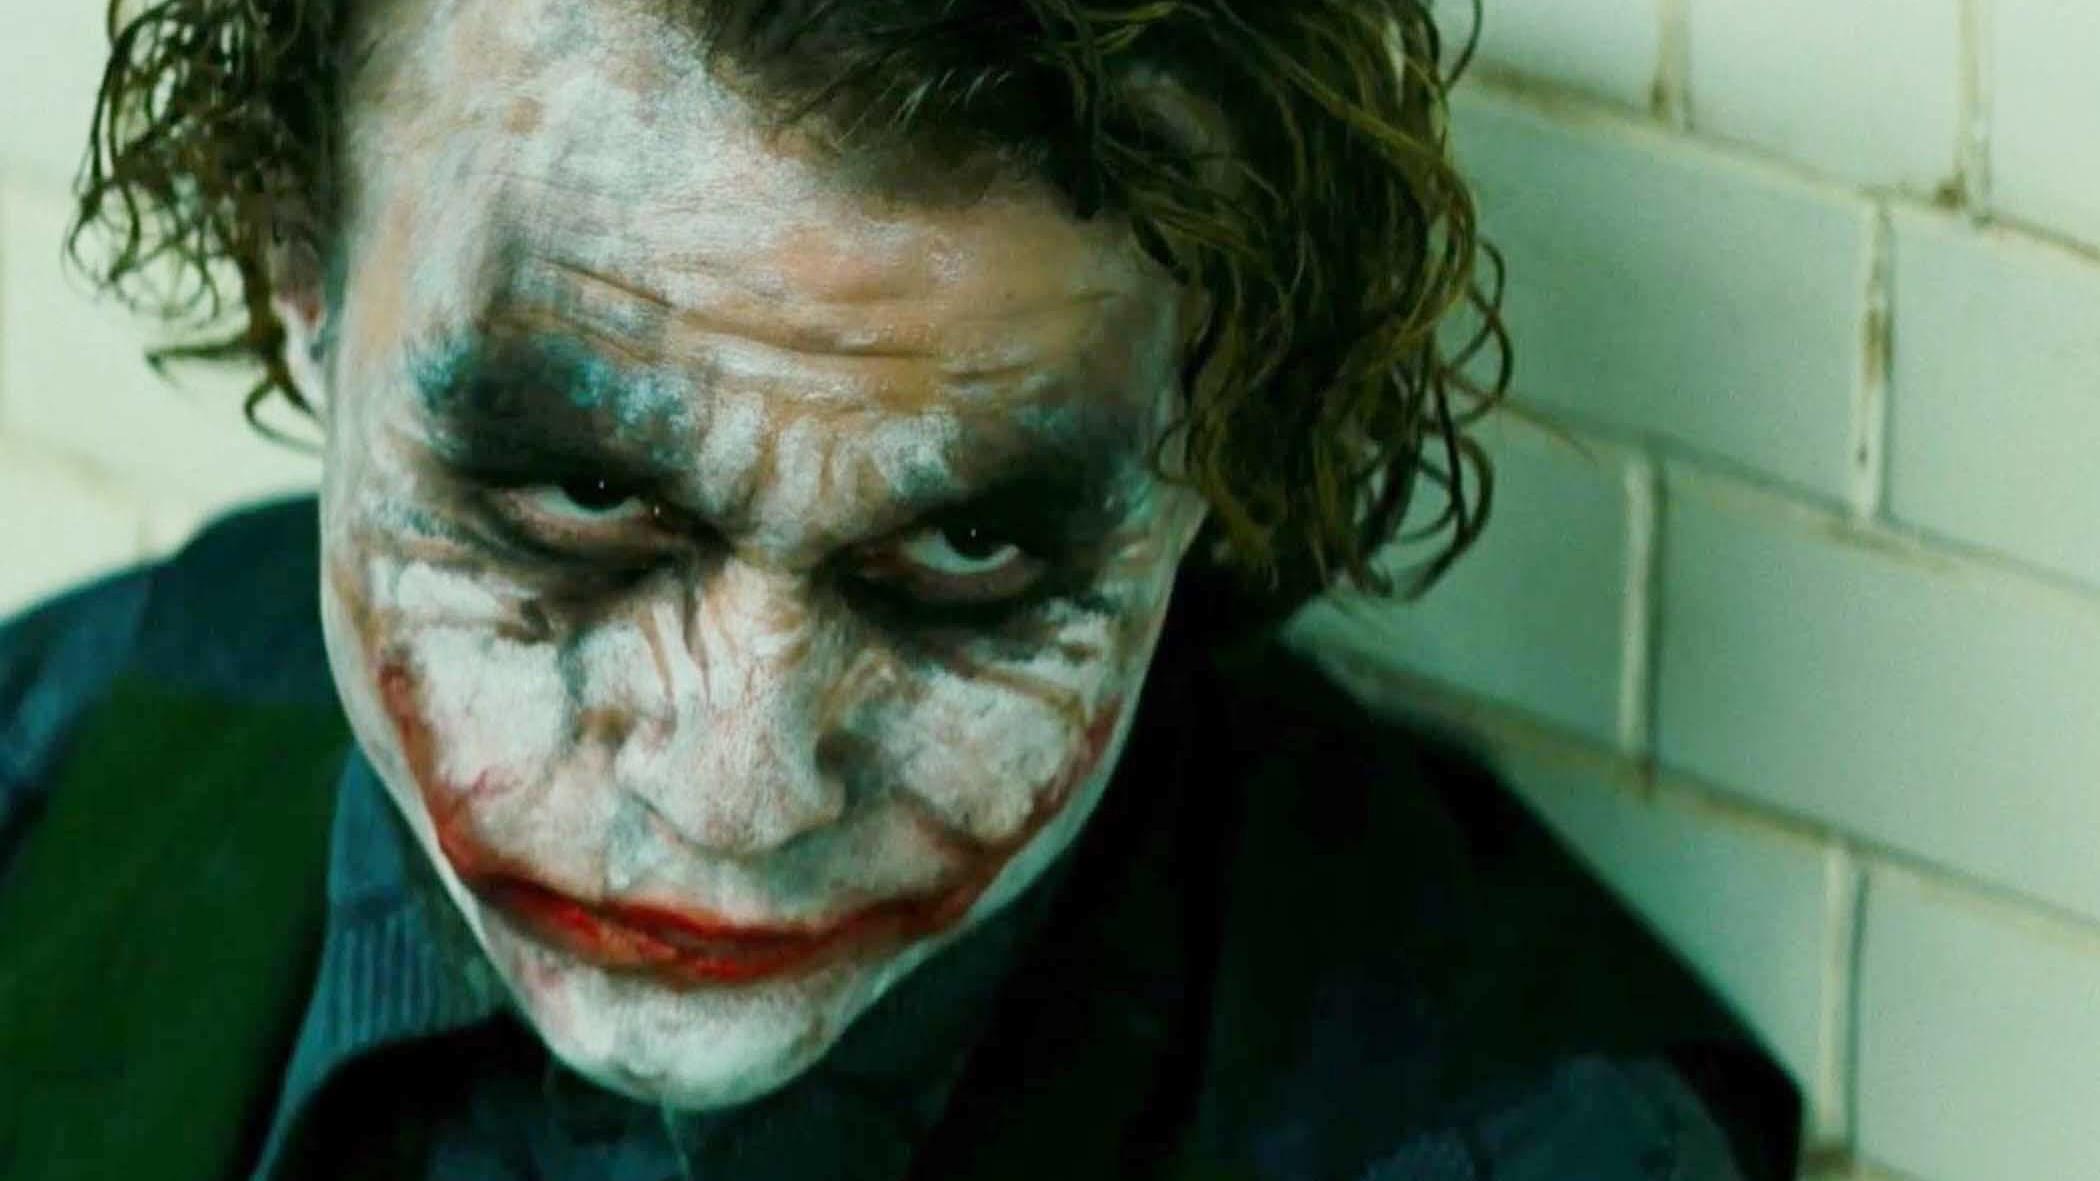 RELEASE DATE: July 18, 2008. MOVIE TITLE: The Dark Knight. STUDIO: DC Comics and Legendary Pictures PLOT: Batman and James Gordon join forces with Gotham s new District Attorney, Harvey Dent, to take on a psychotic bank robber known as The Joker, whi